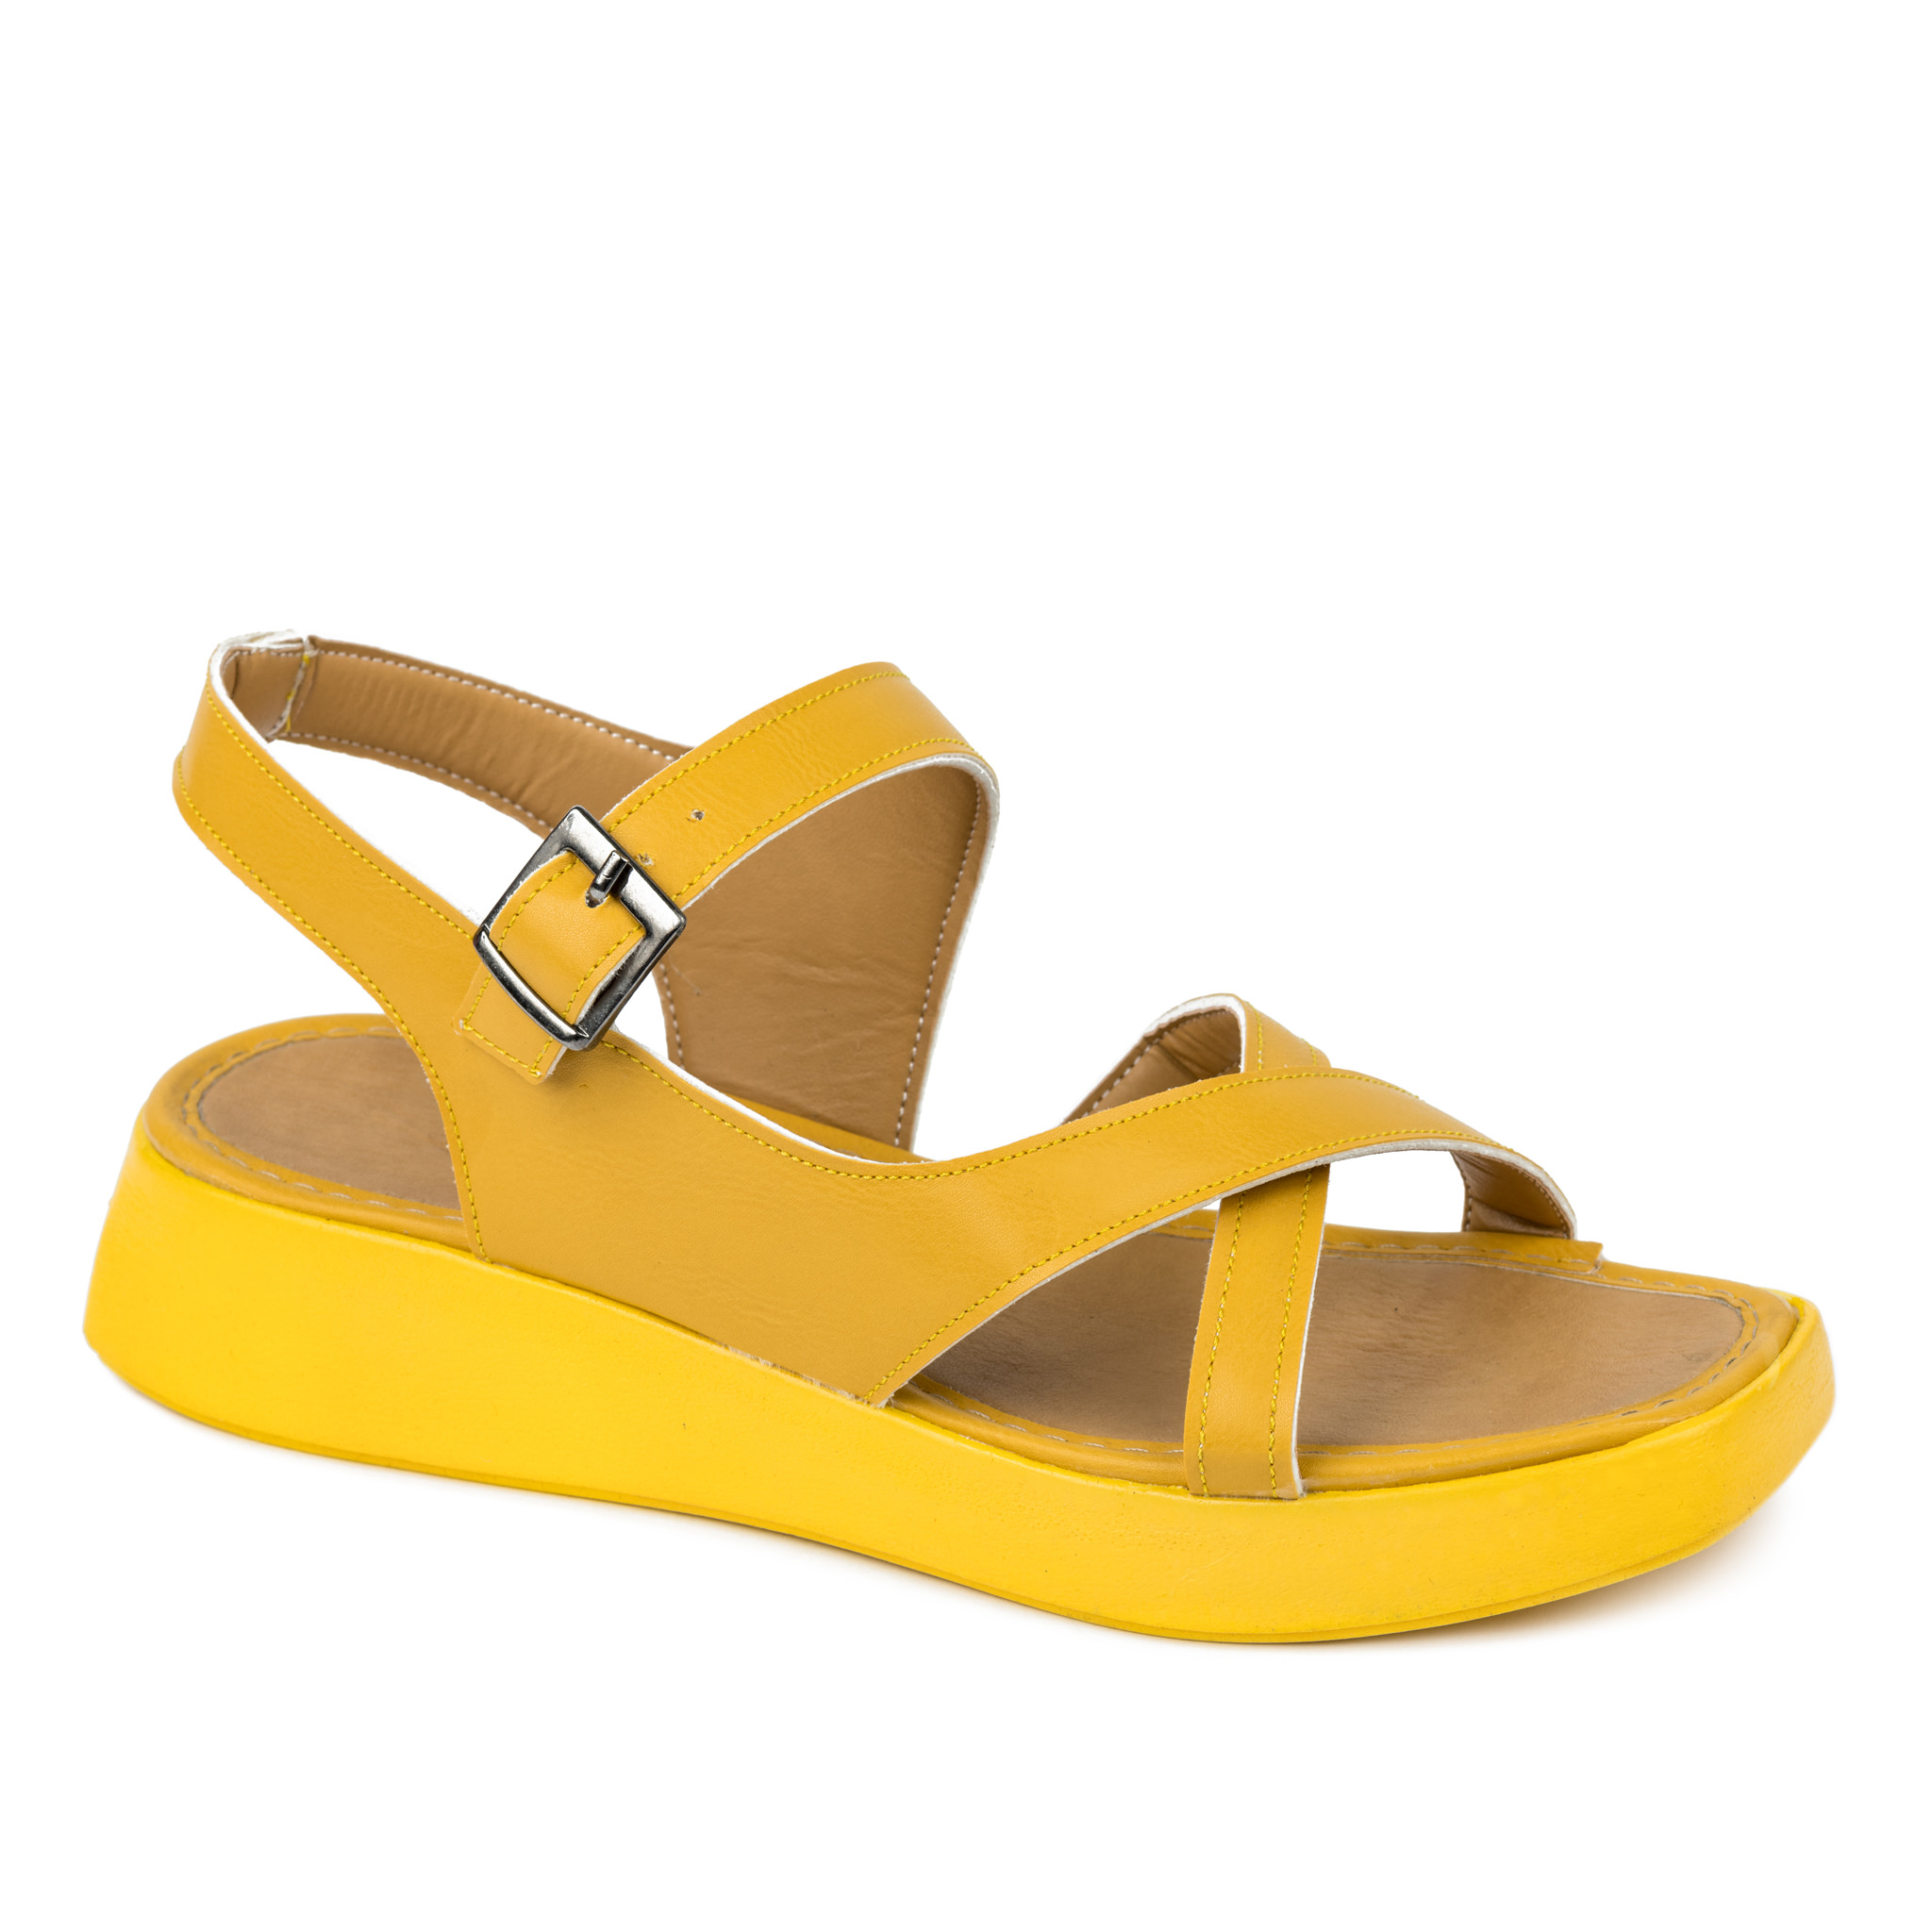 CROSS STRAP SANDALS WITH BELTS - YELLOW